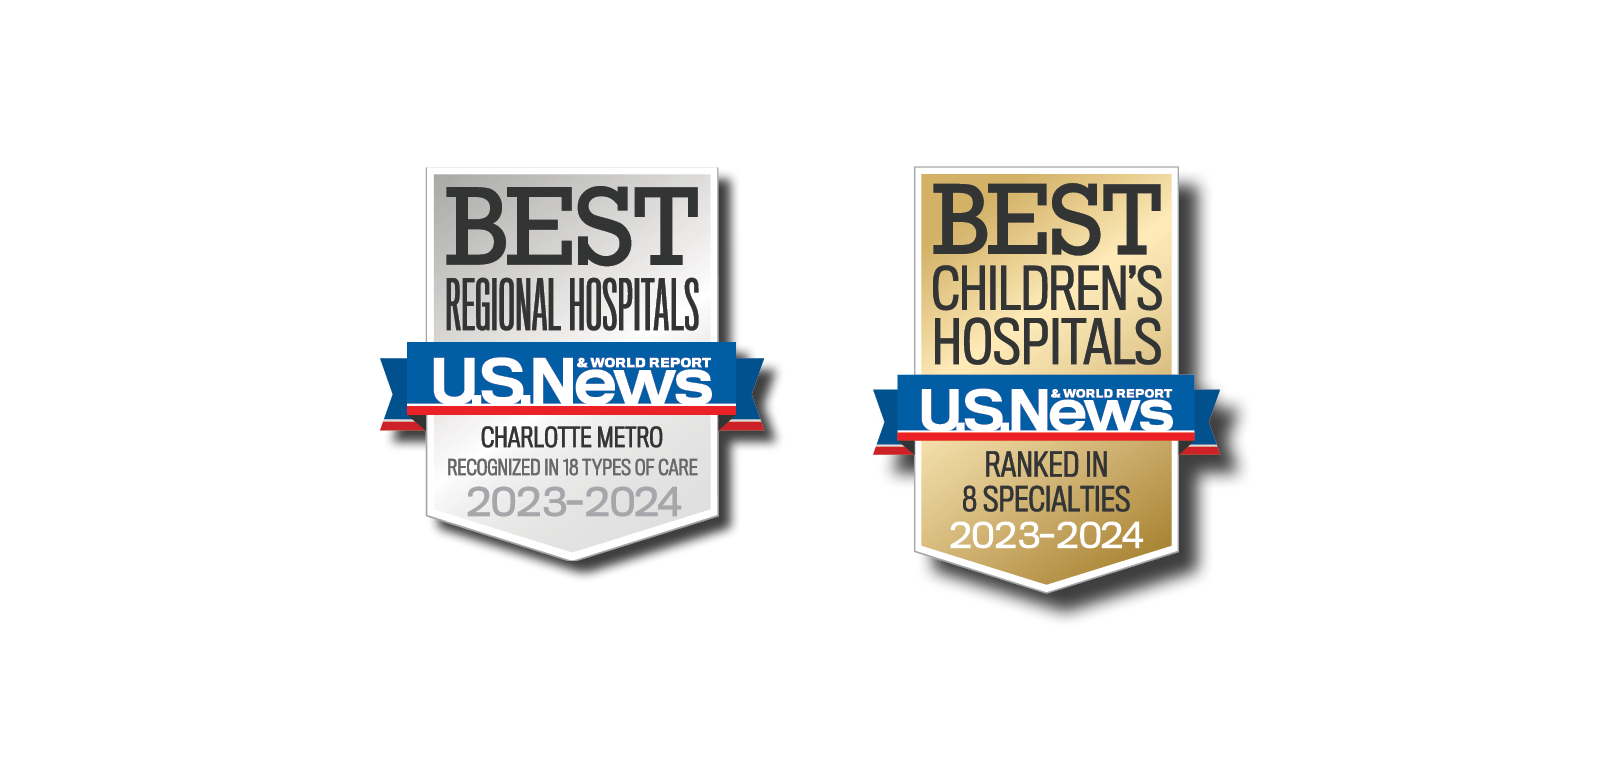  Top hospitals for kids and adults